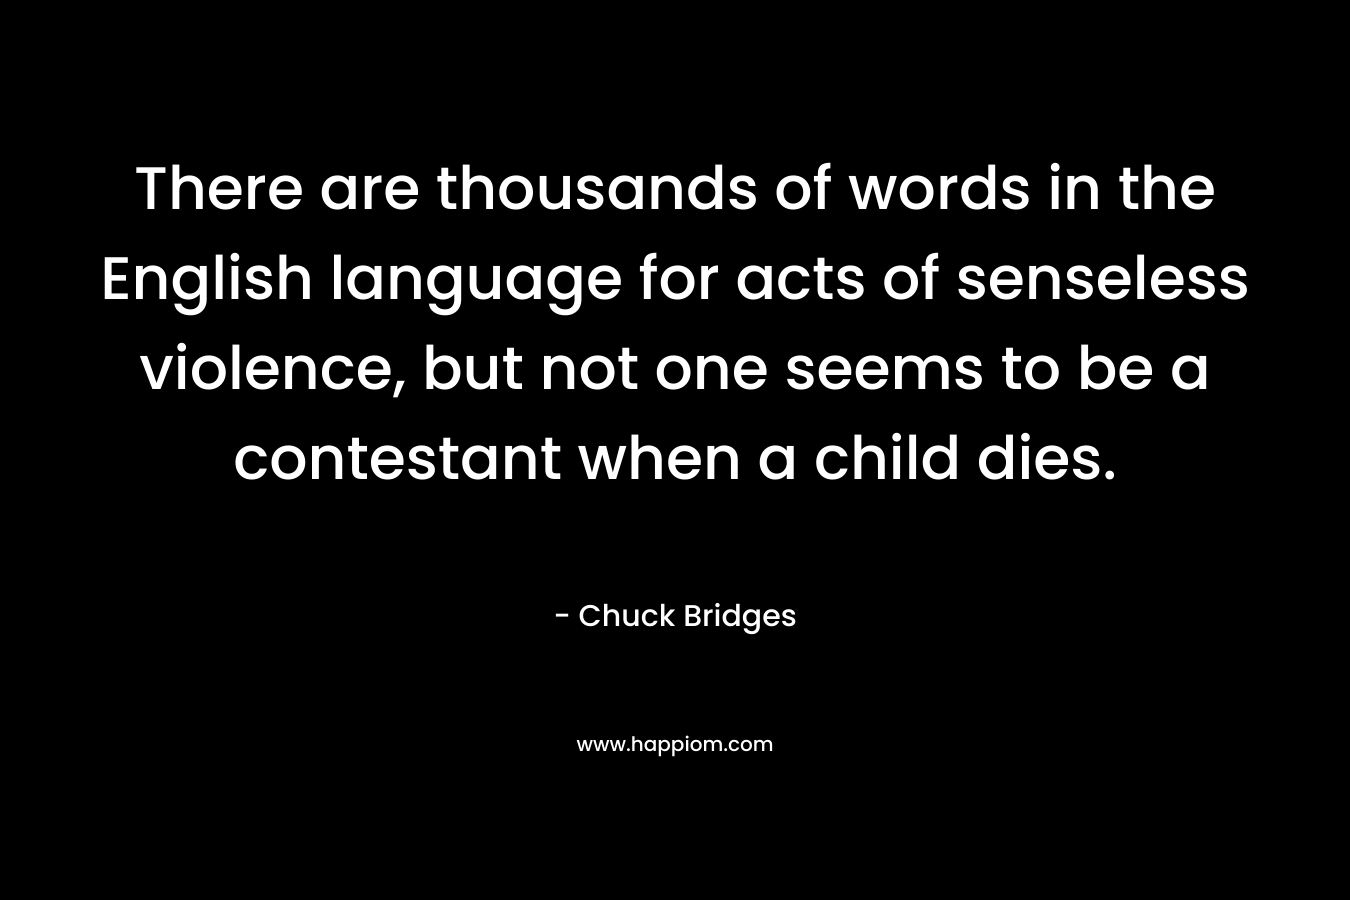 There are thousands of words in the English language for acts of senseless violence, but not one seems to be a contestant when a child dies.